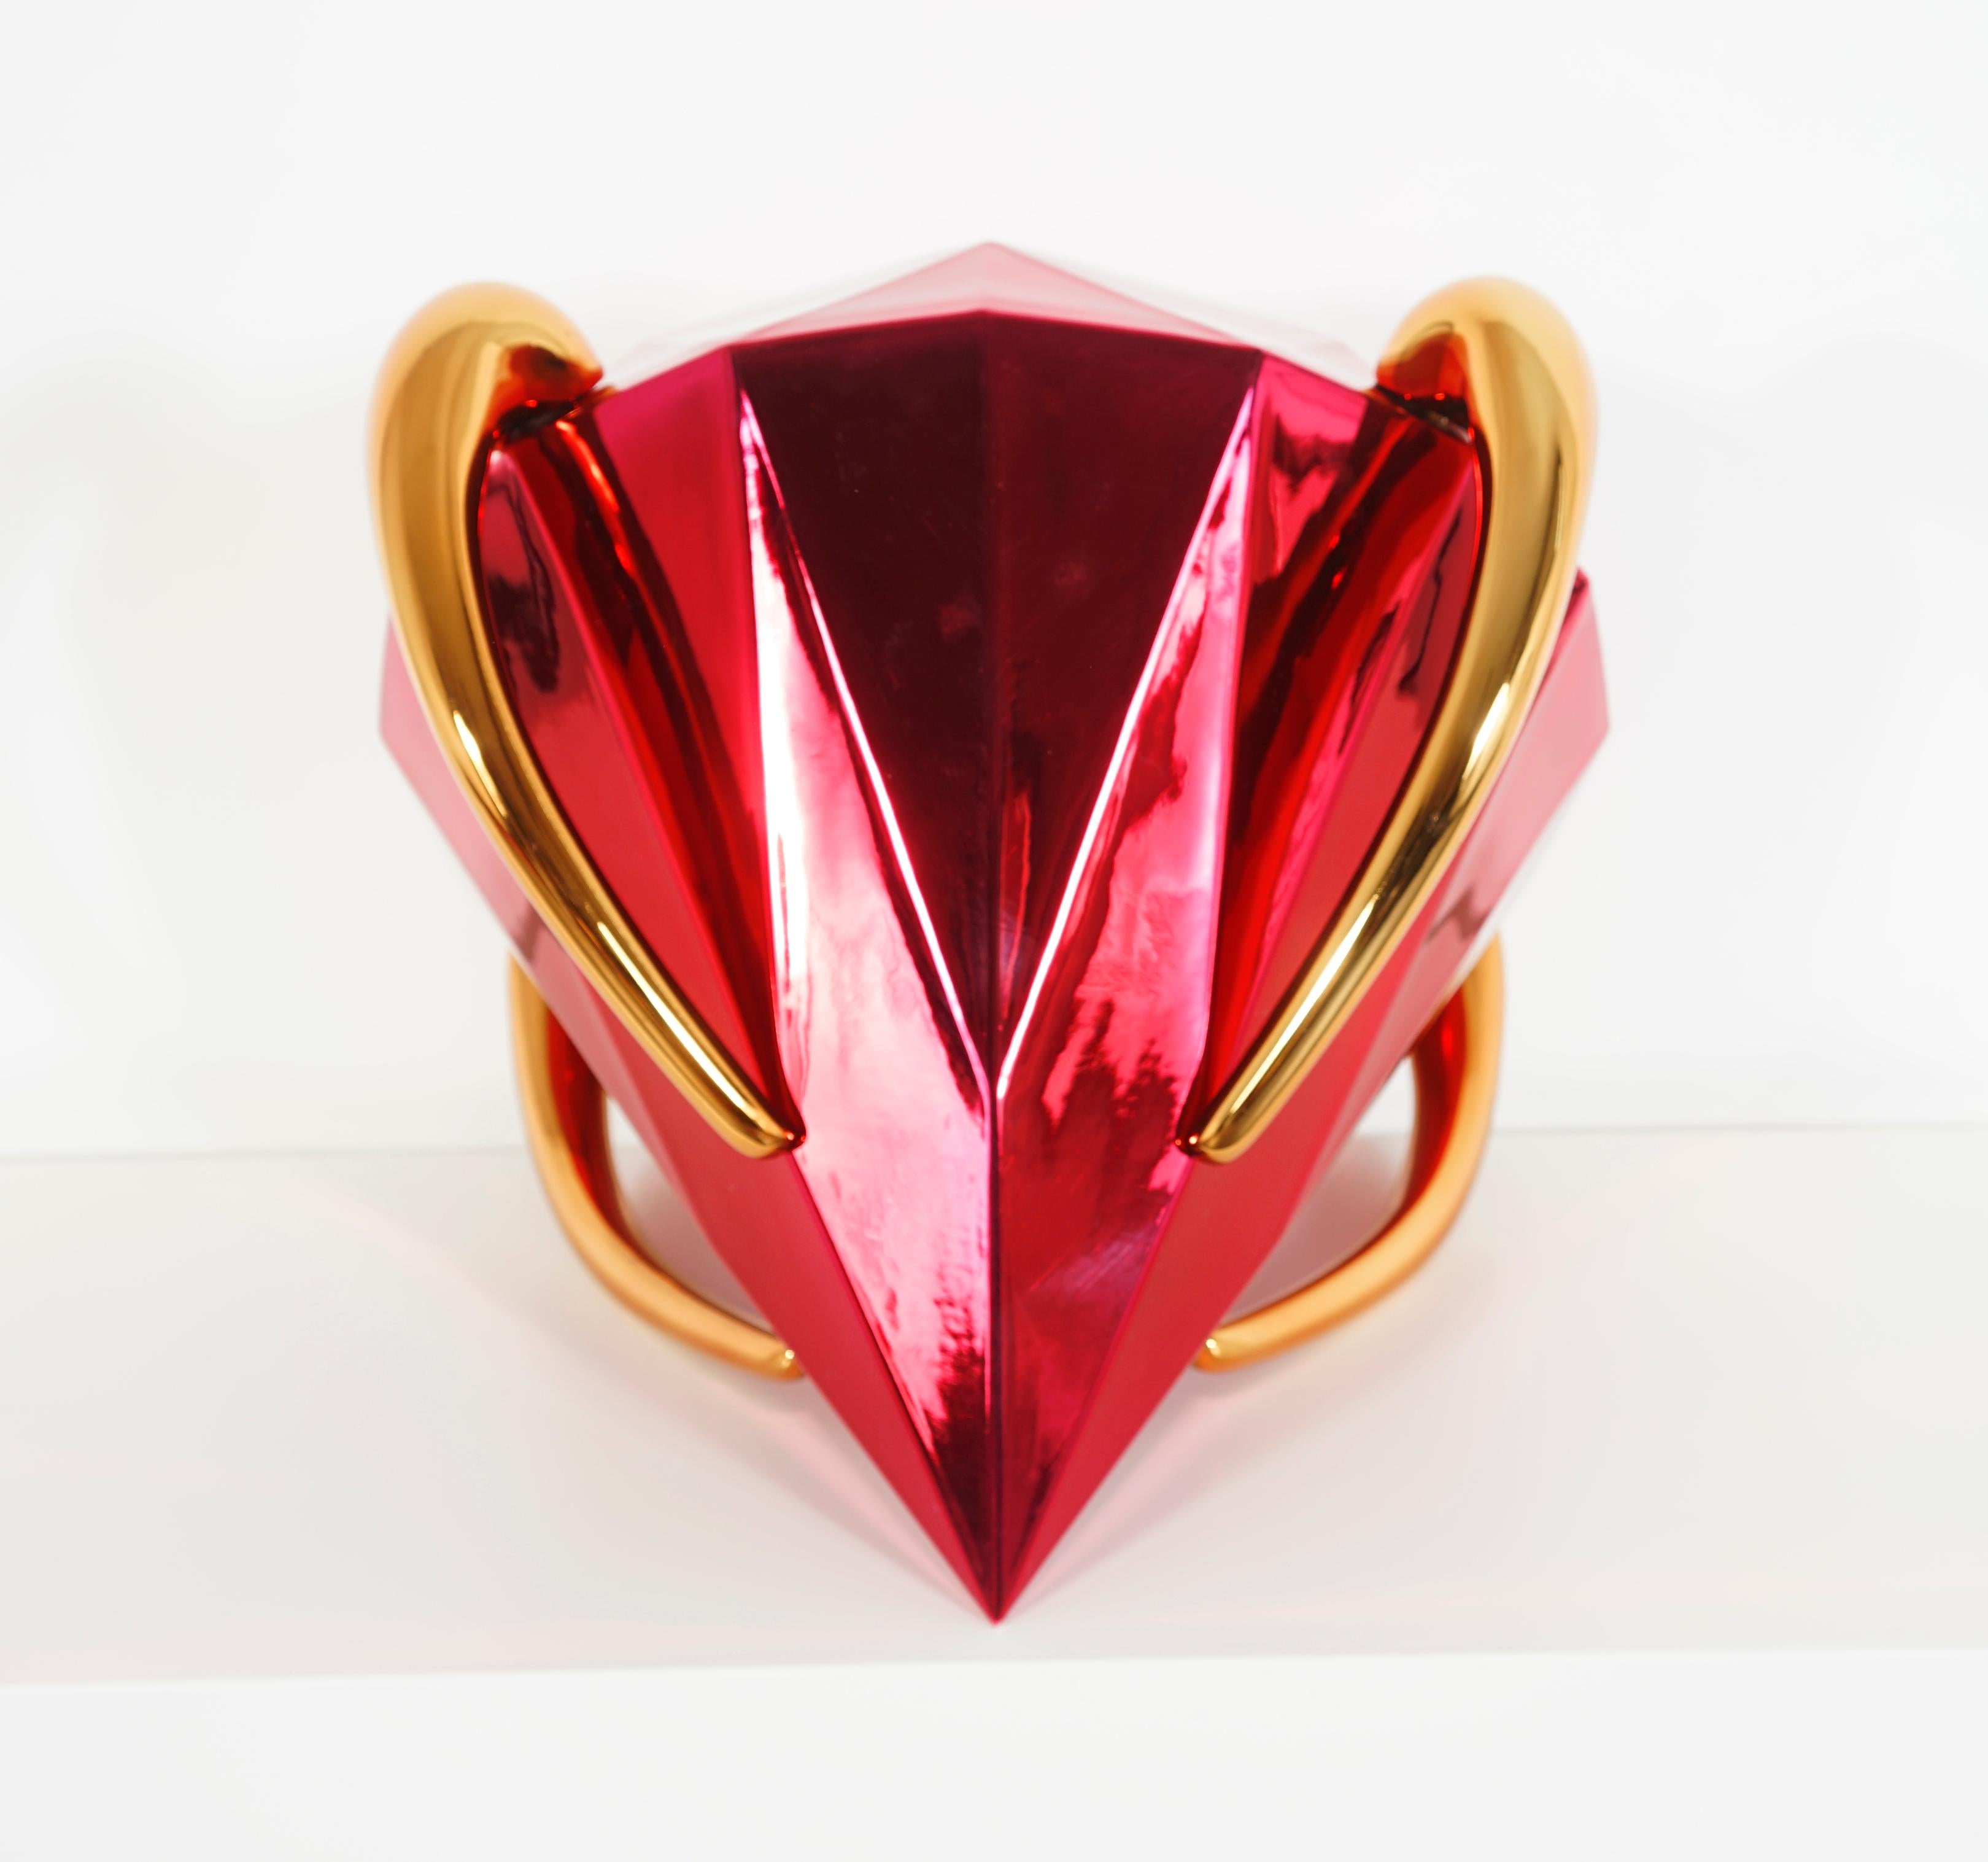 Red Diamond Sculpture by Jeff Koons, Porcelaine, Objects for Objects, Contemporary Art en vente 3